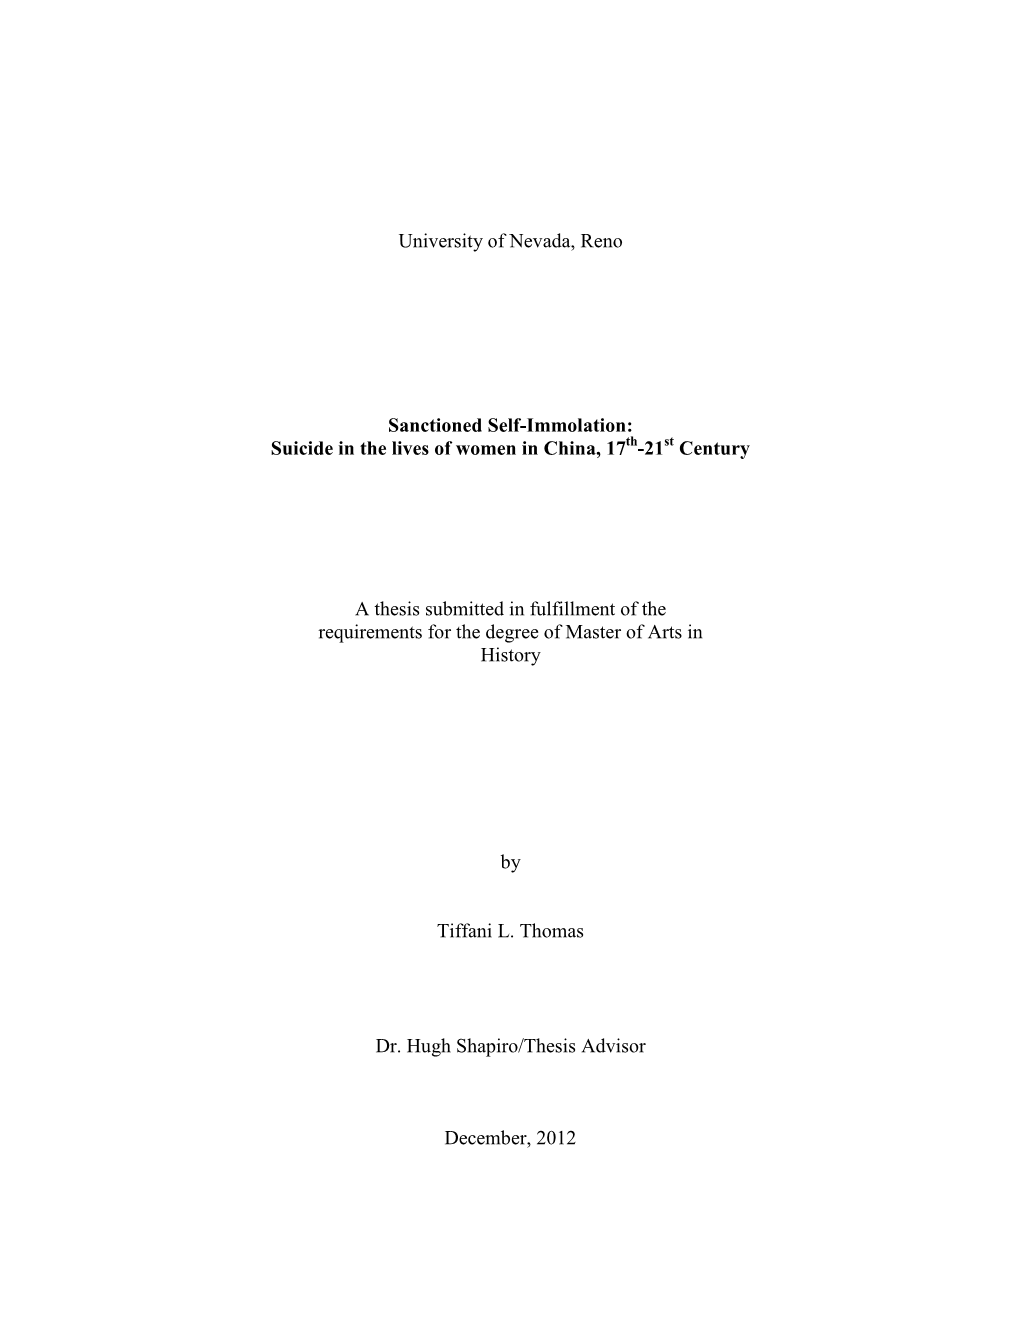 Suicide in the Lives of Women in China, 17 -21 Century a Thesis Submitted